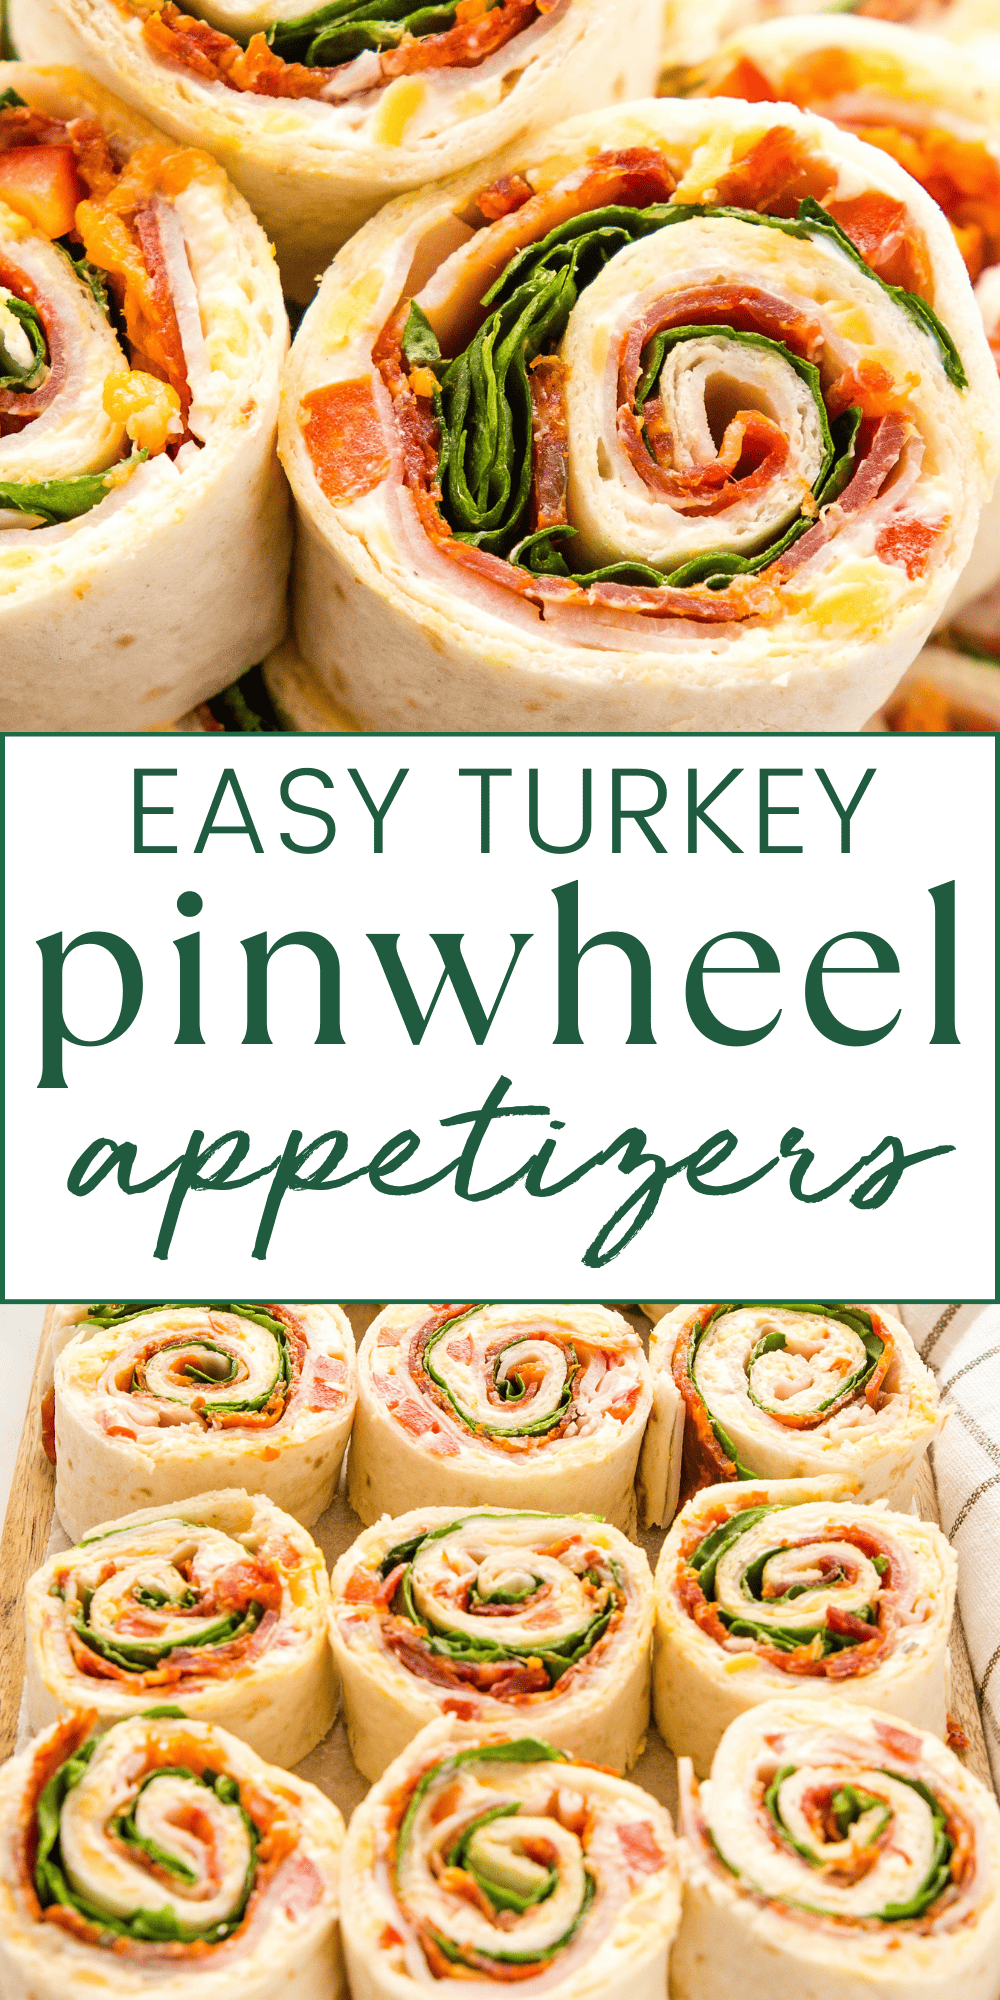 This easy Pinwheels recipe is the perfect snack, appetizer, or lunch idea! Easy-to-make pinwheel sandwiches made with tortillas, meat, cheese, and veggies that are easy to customize to any dietary preference and for any occasion! Recipe from thebusybaker.ca! #pinwheels #pinwheelappetizers #easypinwheelsandwiches #pinwheelsandwiches #snack #appetizerrecipe #holidayrecipe #lunchidea #mealprep #kidslunch #schoollunch #makeaheadlunch #sandwich via @busybakerblog